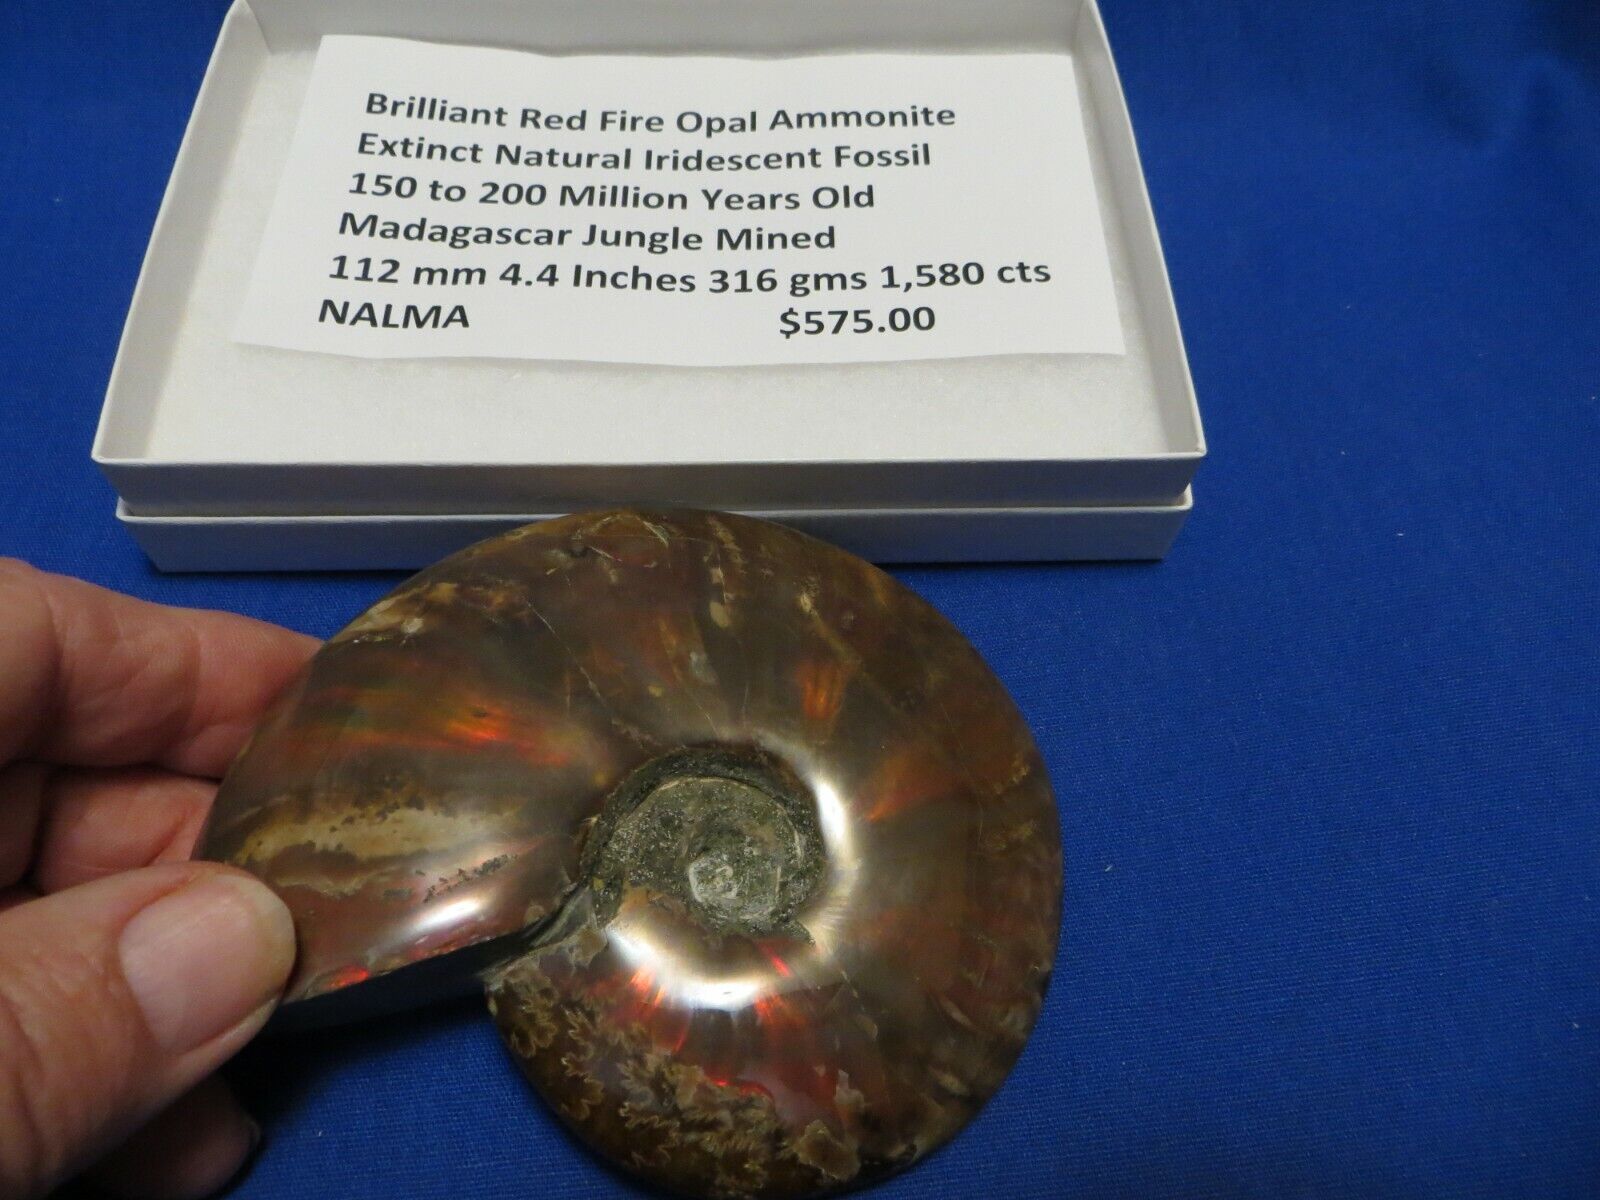 LARGE Brilliant Red Fire Opalized Ammonite Ammonite Gem 1,580 carats 4.4 inch